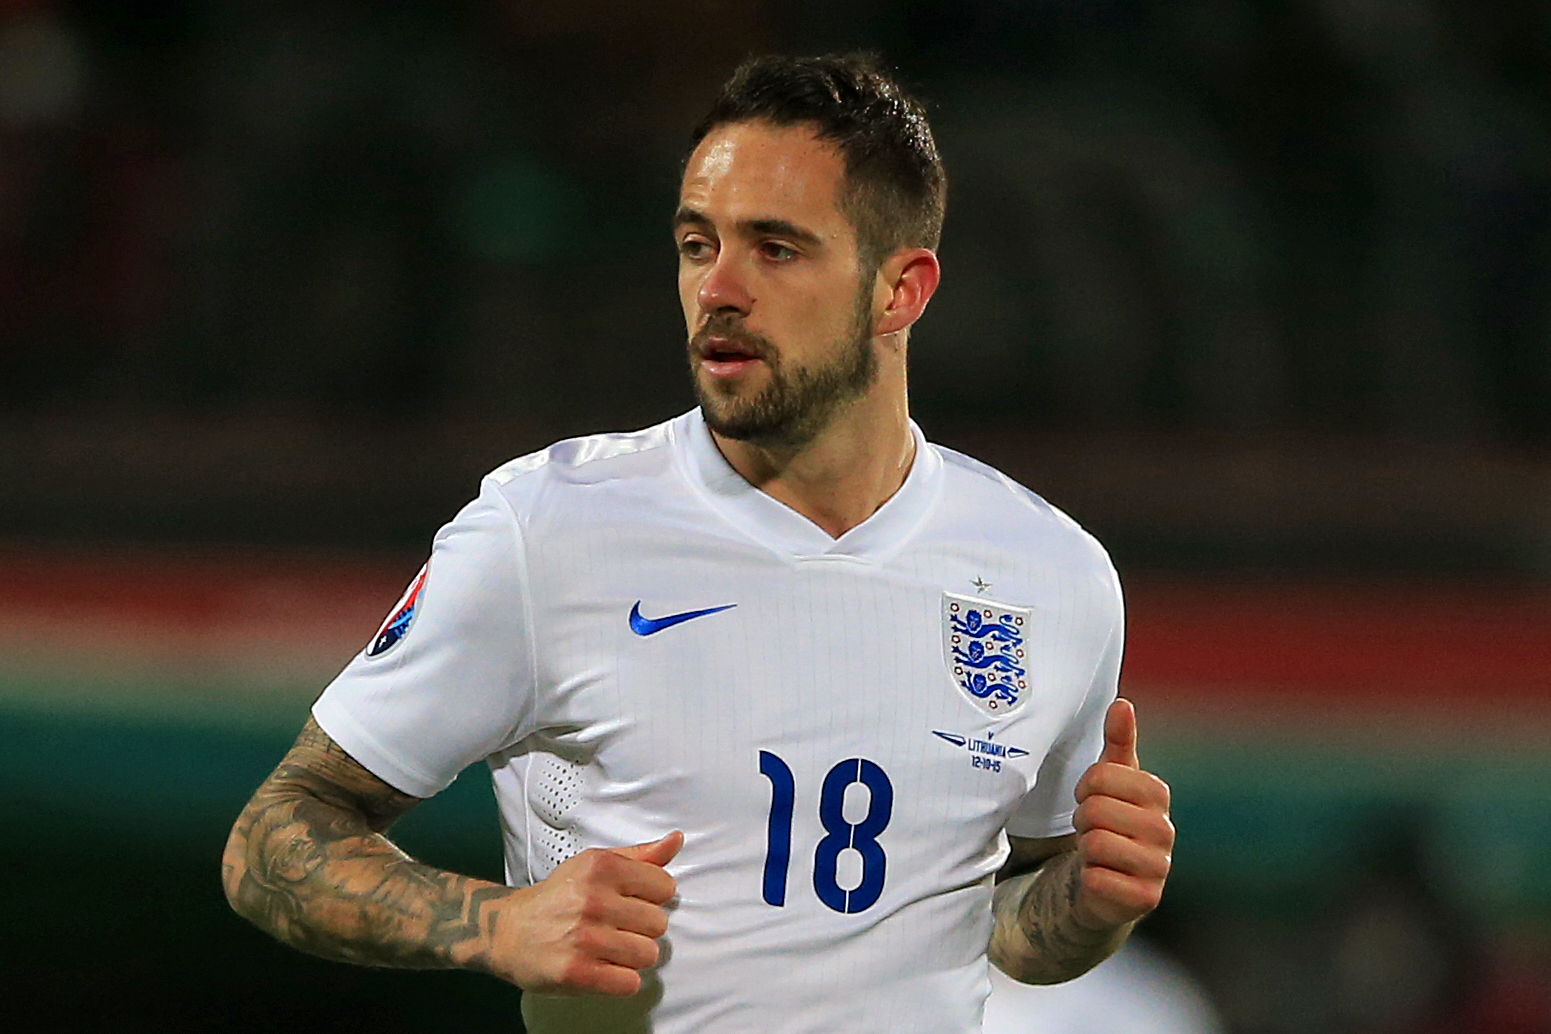 Danny Ings expected to be fit for England's trip to Denmark despite reportedly suffering head injury in training